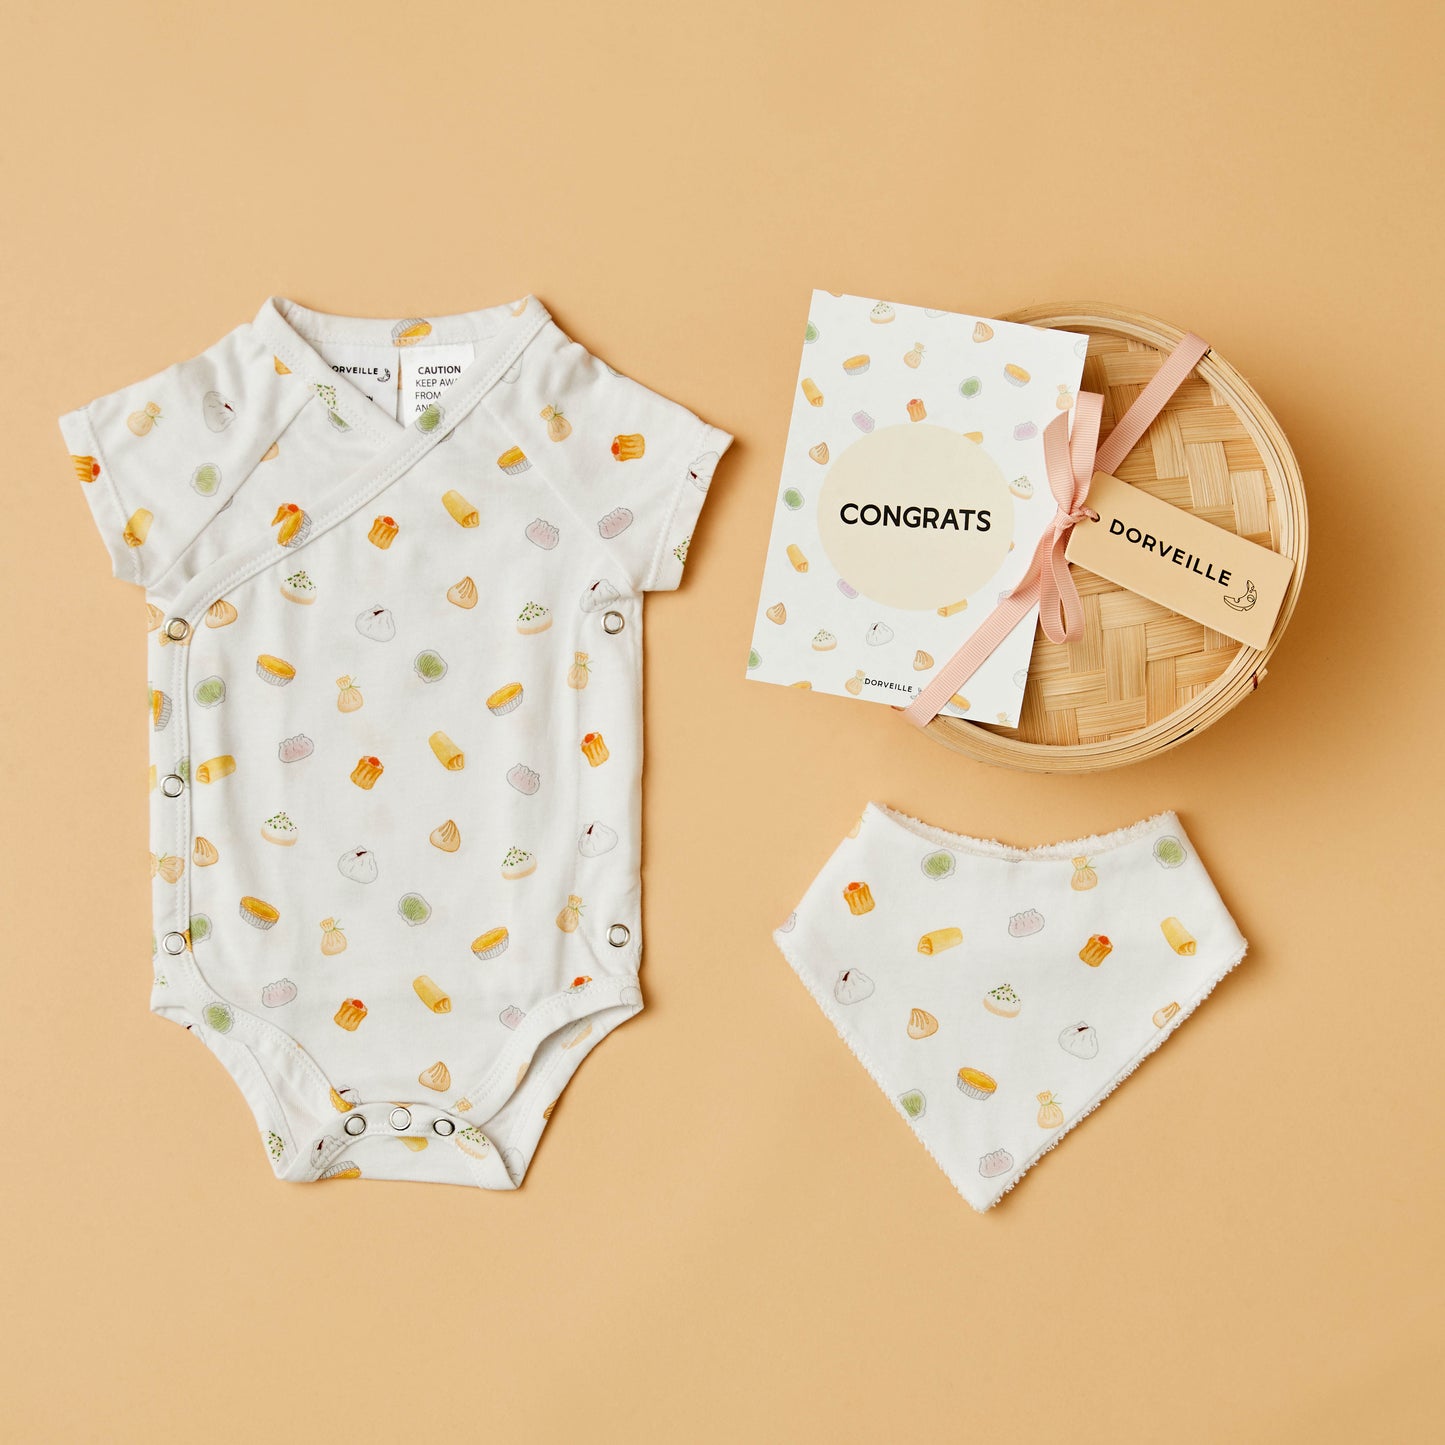 Colourful dim sum inspired baby bodysuit, matching bib, Congrats postcard and bamboo steamer basket gift box